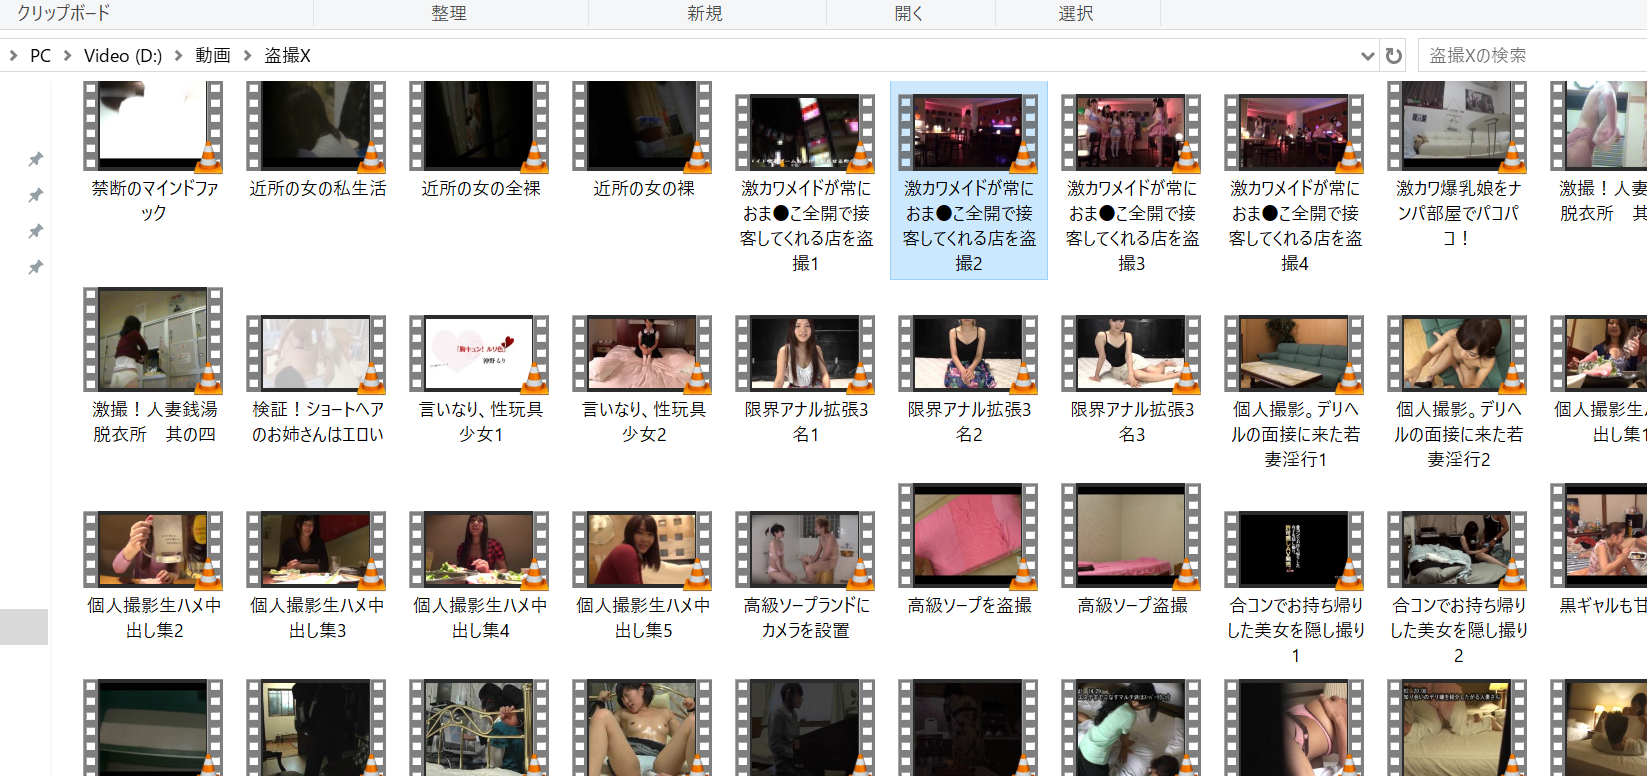 some of the JAV erotic videos I downloaded from Voyeur X